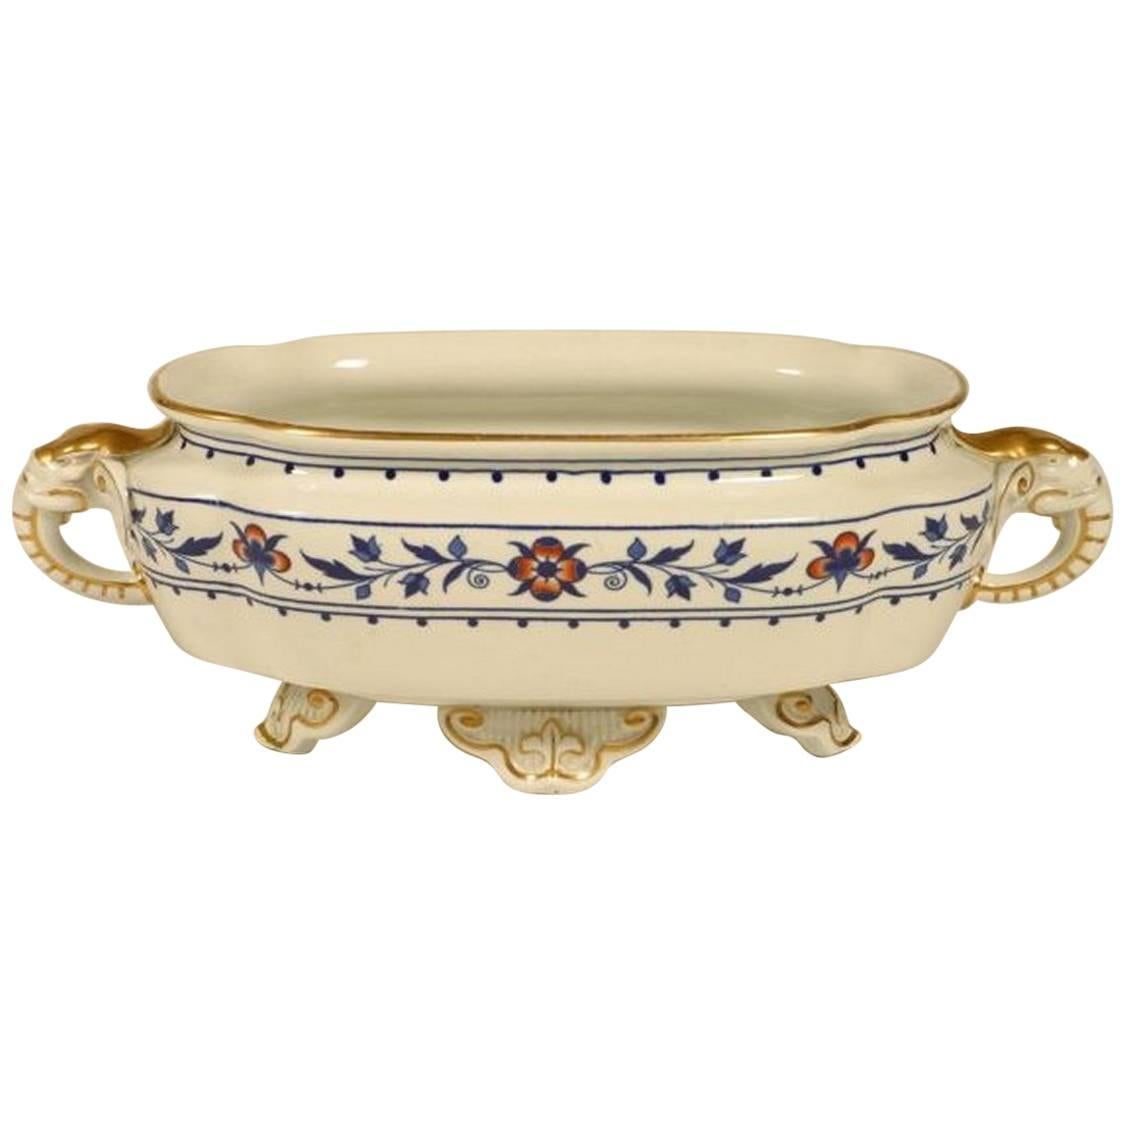 Dr C Dresser, Attributed Made by Royal Worcester, Blue & White Elephant Tureen